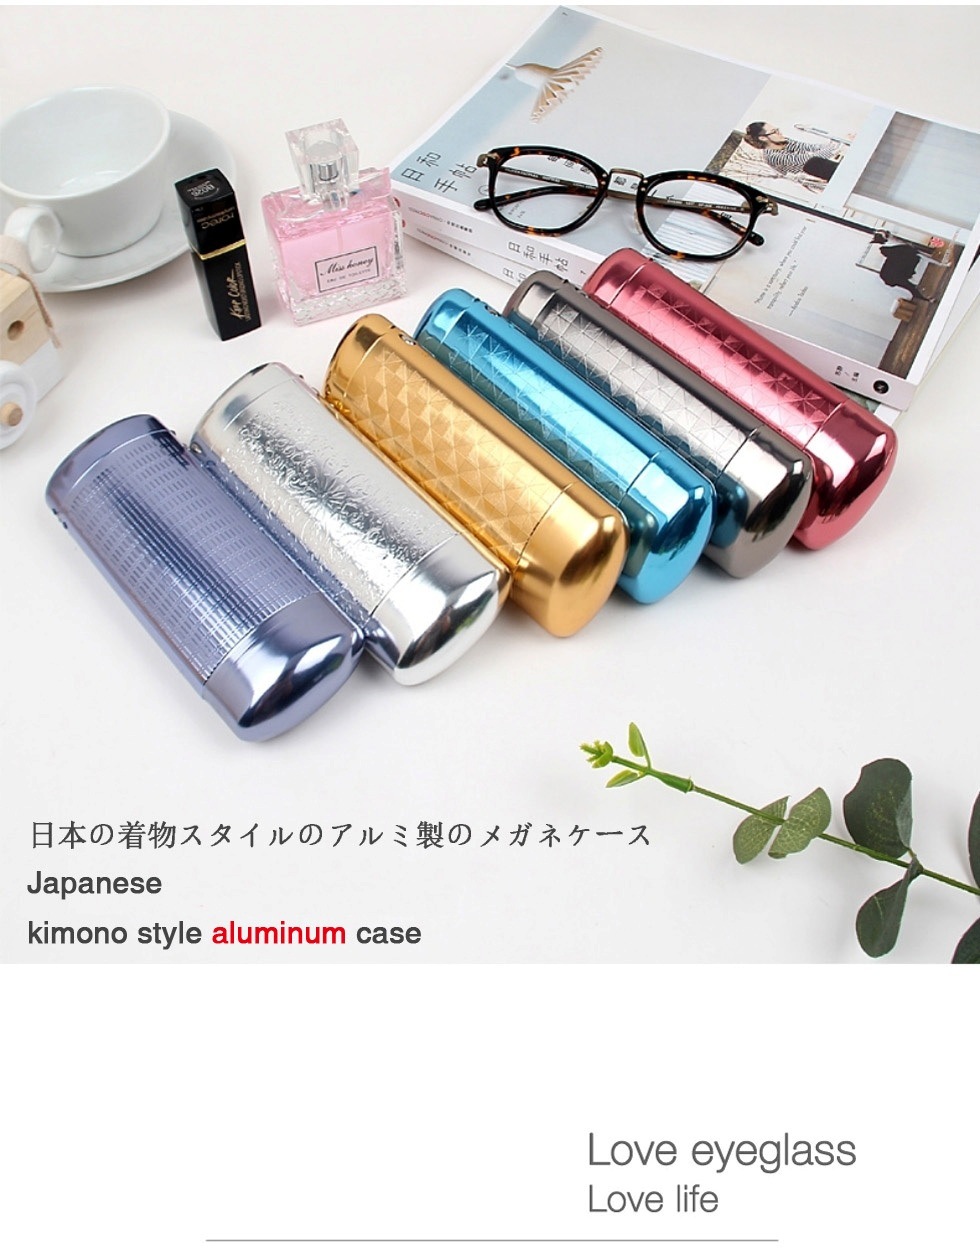 Lightweight Aluminium Hard Protective Case for Reading Glasses and Sunglasses; Engraved Compact Metallic Eyewear Case